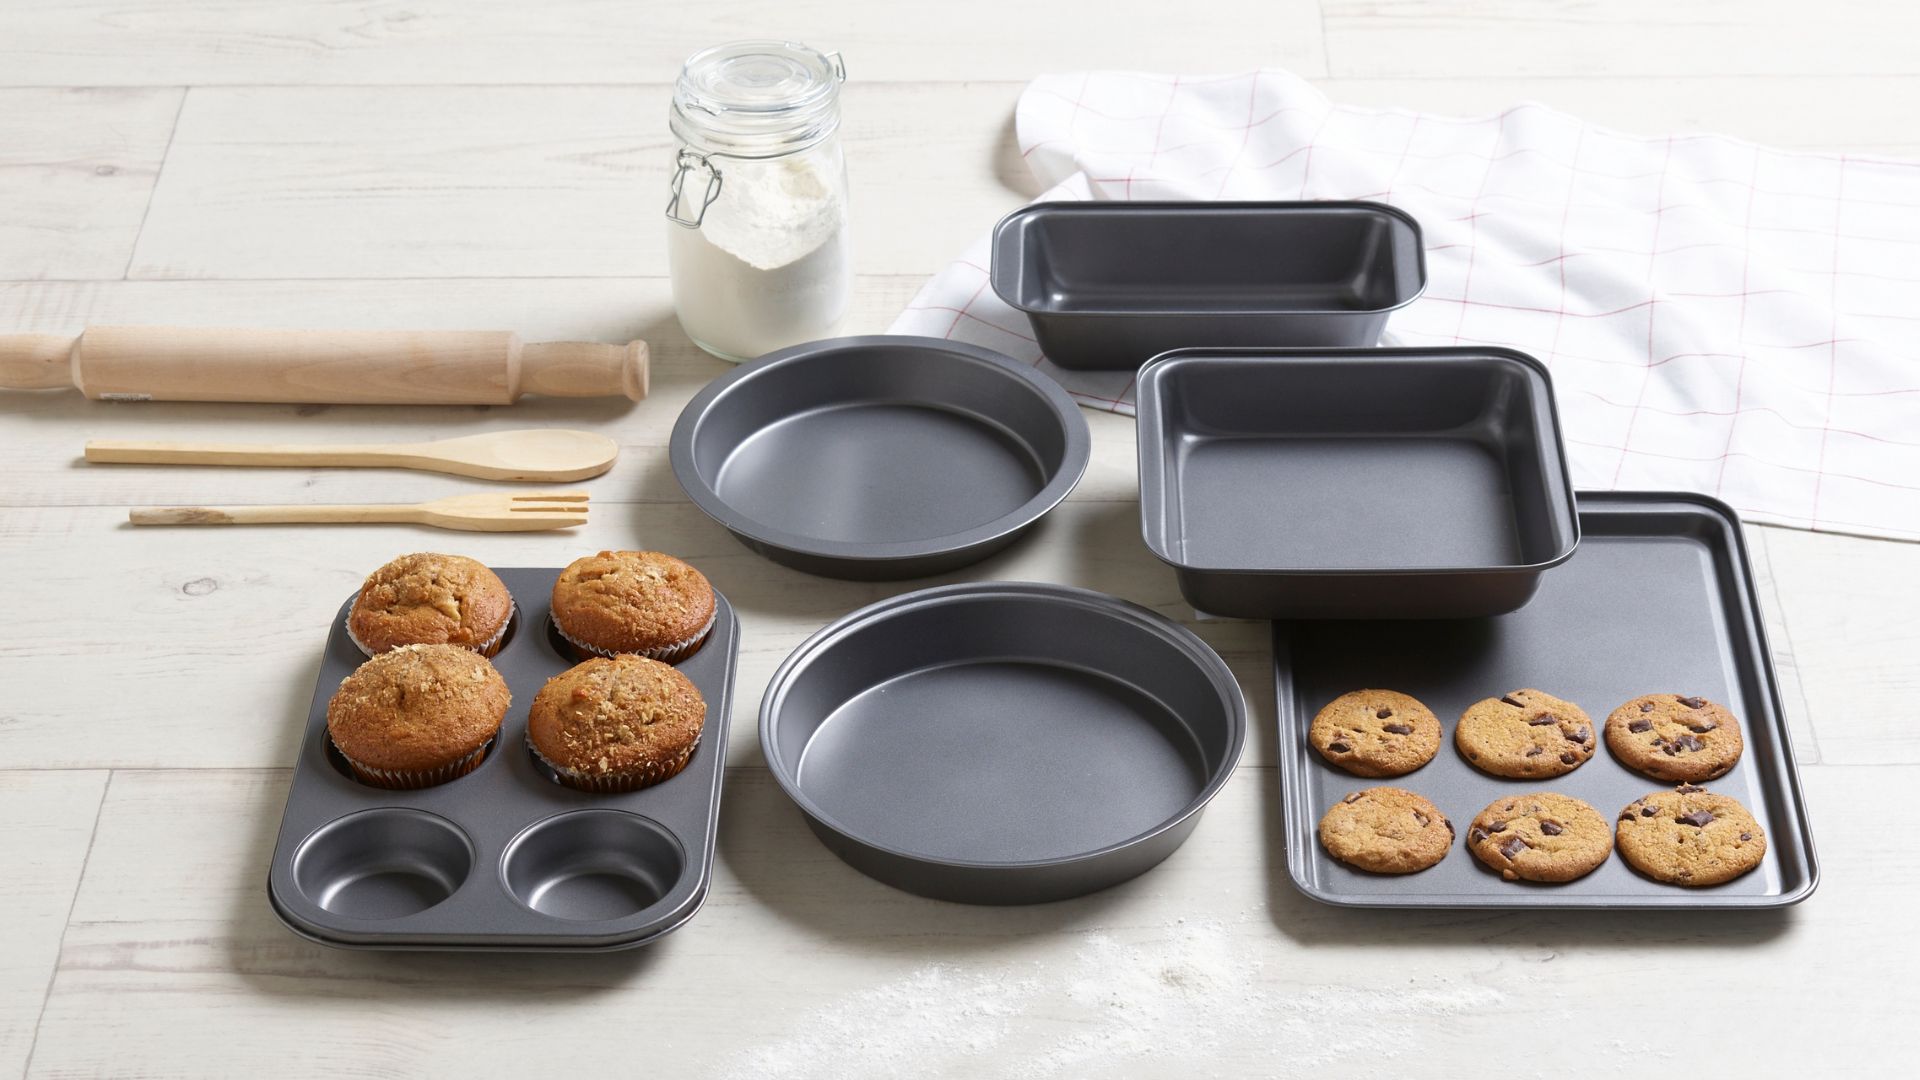 Muffin tray, cake and loaf pans, and cookie tray